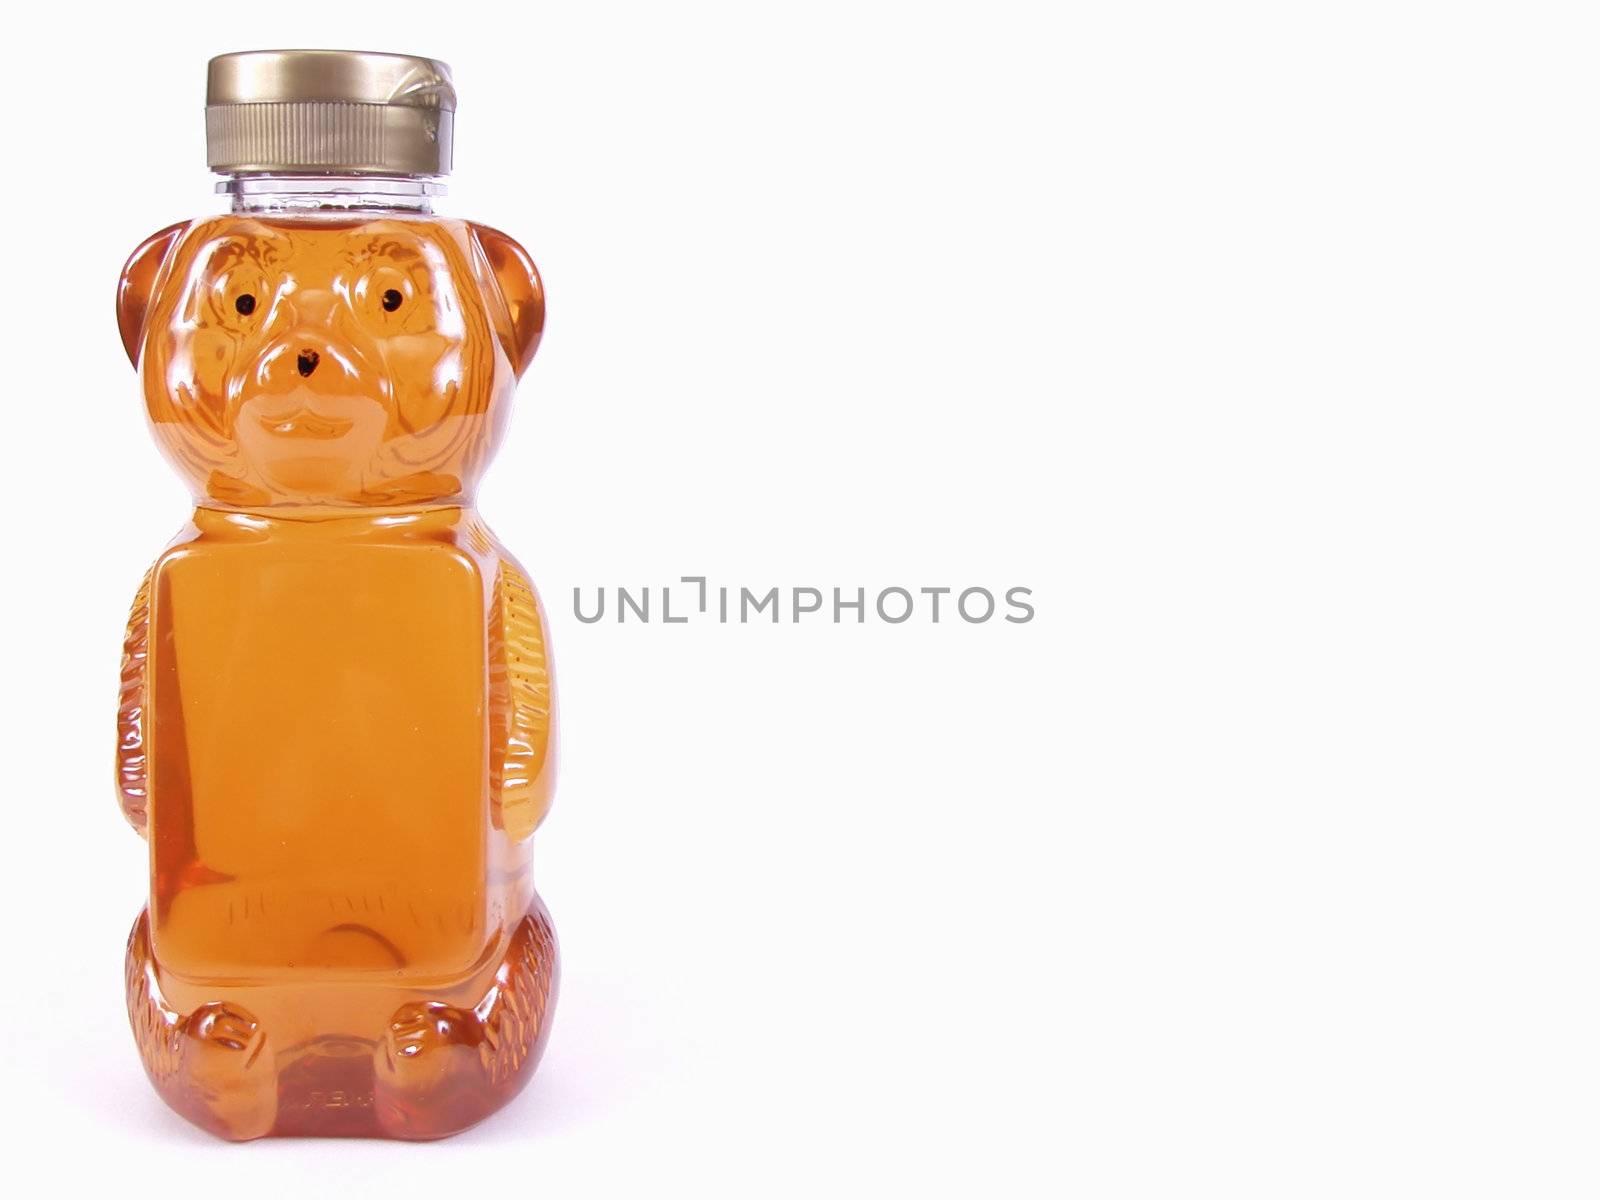 A bear shaped container of honey, off center with room for text on bear bottle and background. Over a white background.